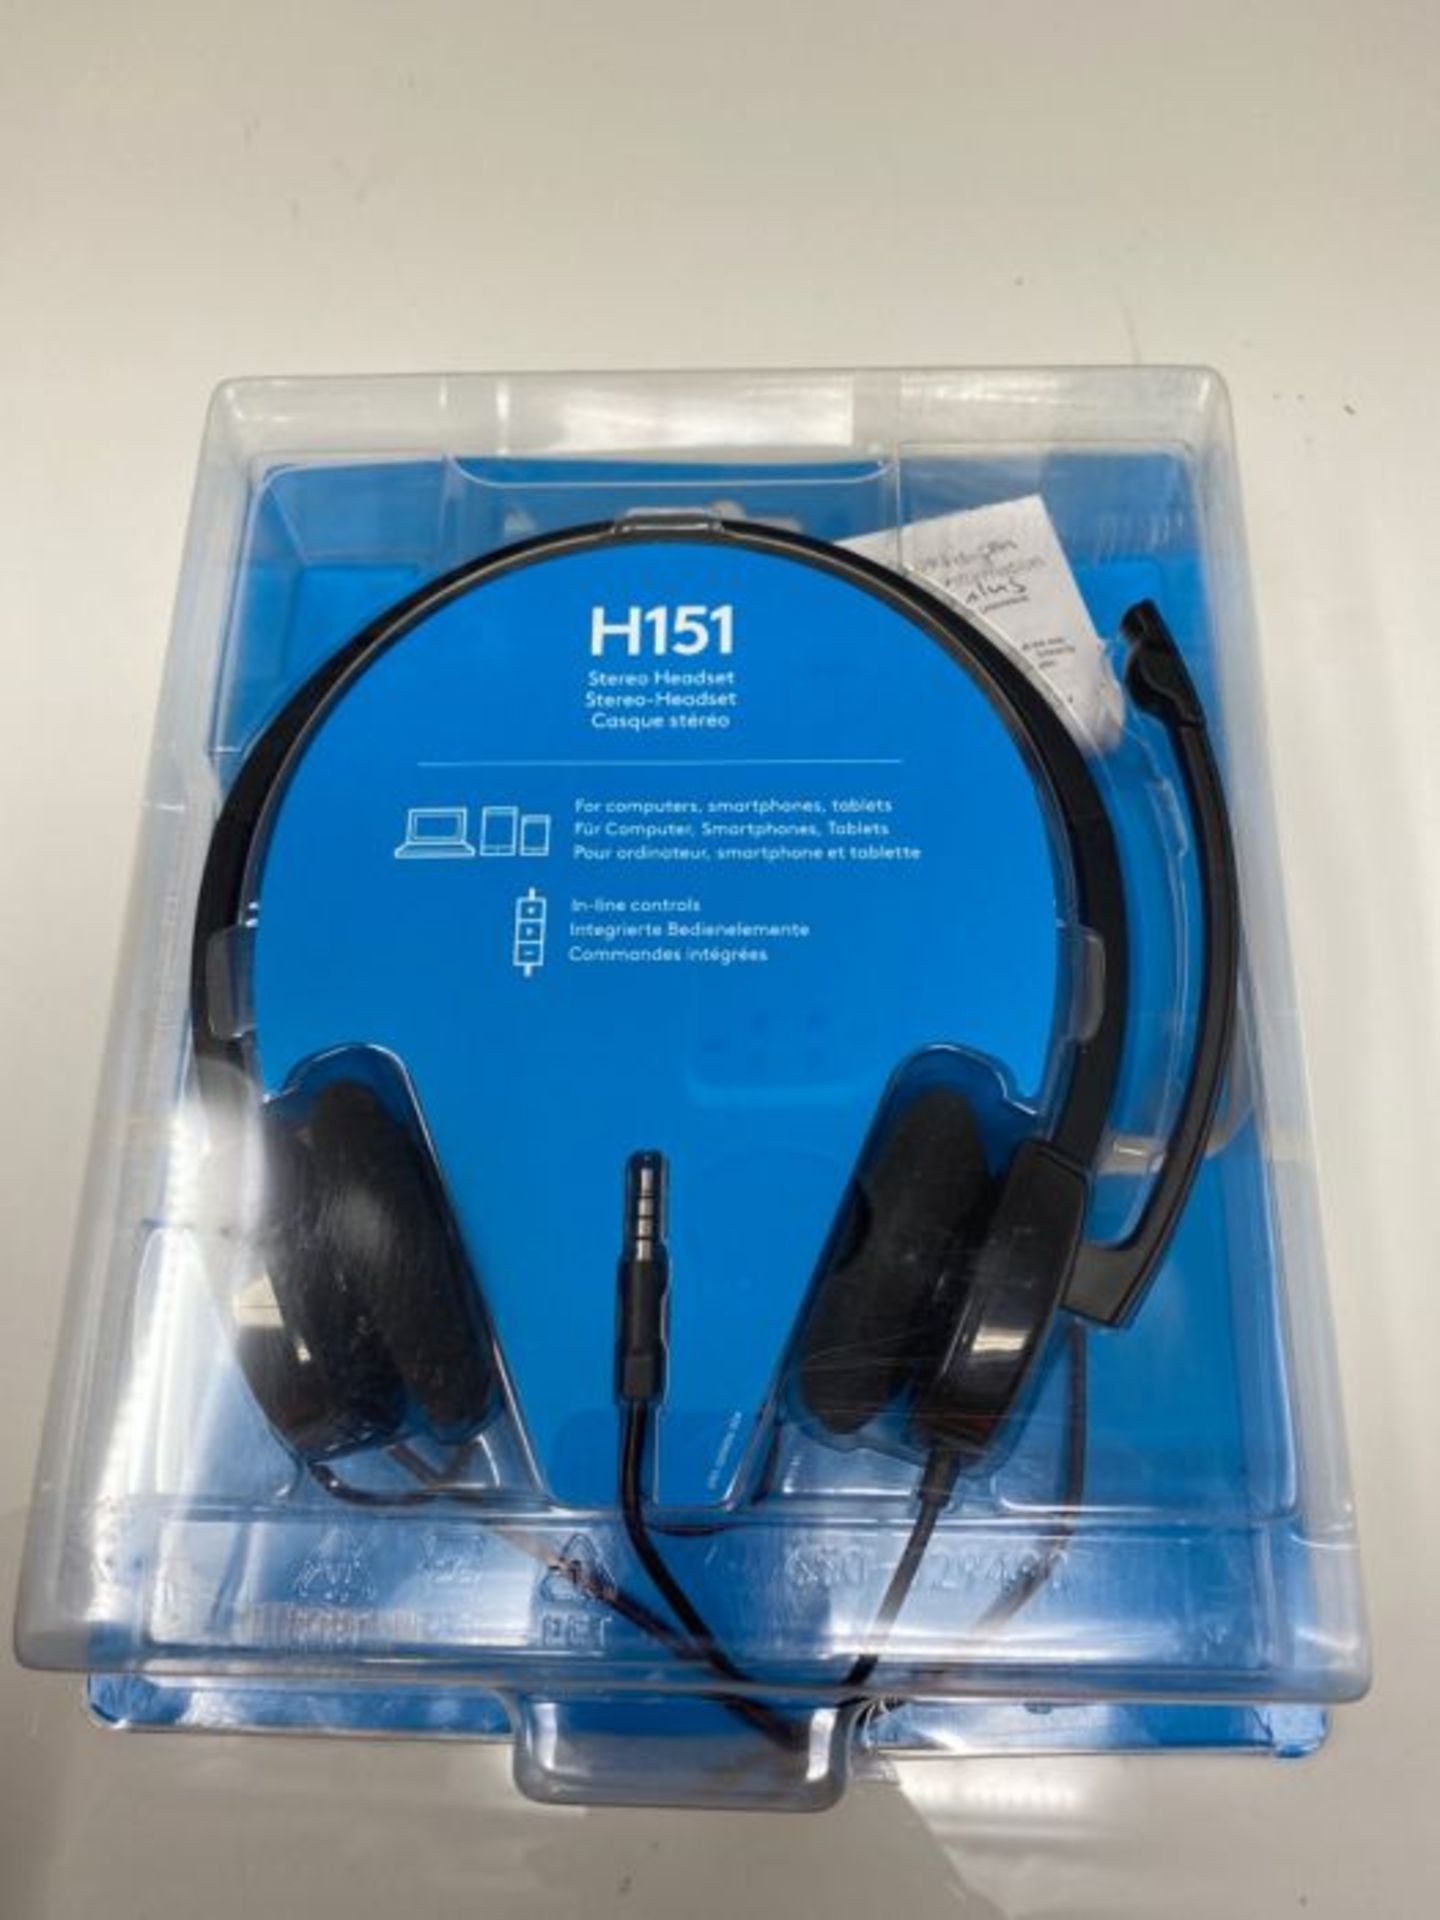 Logitech H151 Wired Headset, Stereo Headphones with Rotating Noise-Cancelling Micropho - Image 2 of 3